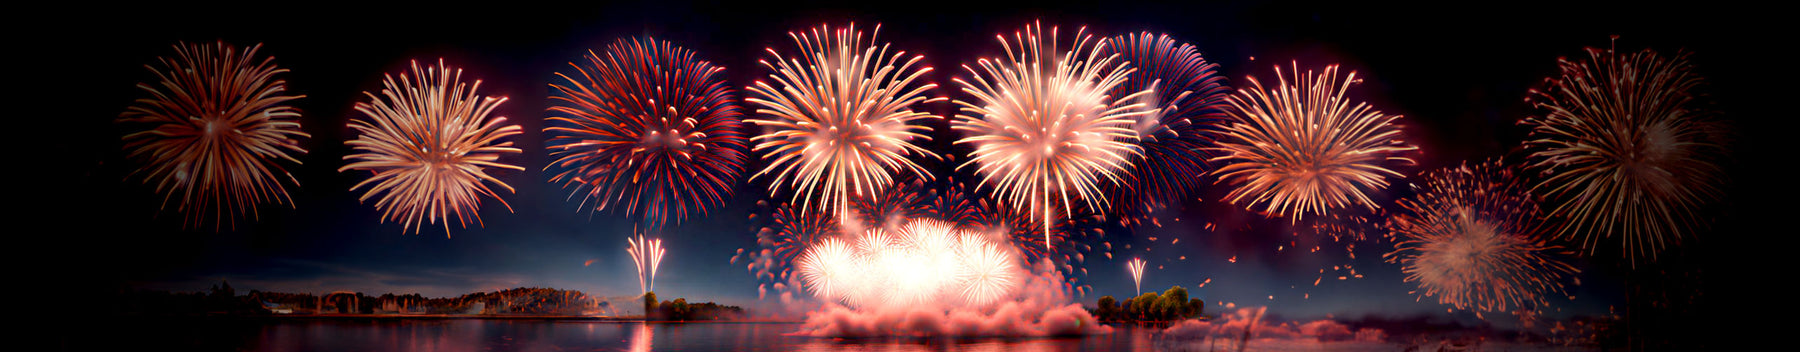 Top Pyro Picks: The Best Fireworks to Blow the Budget With